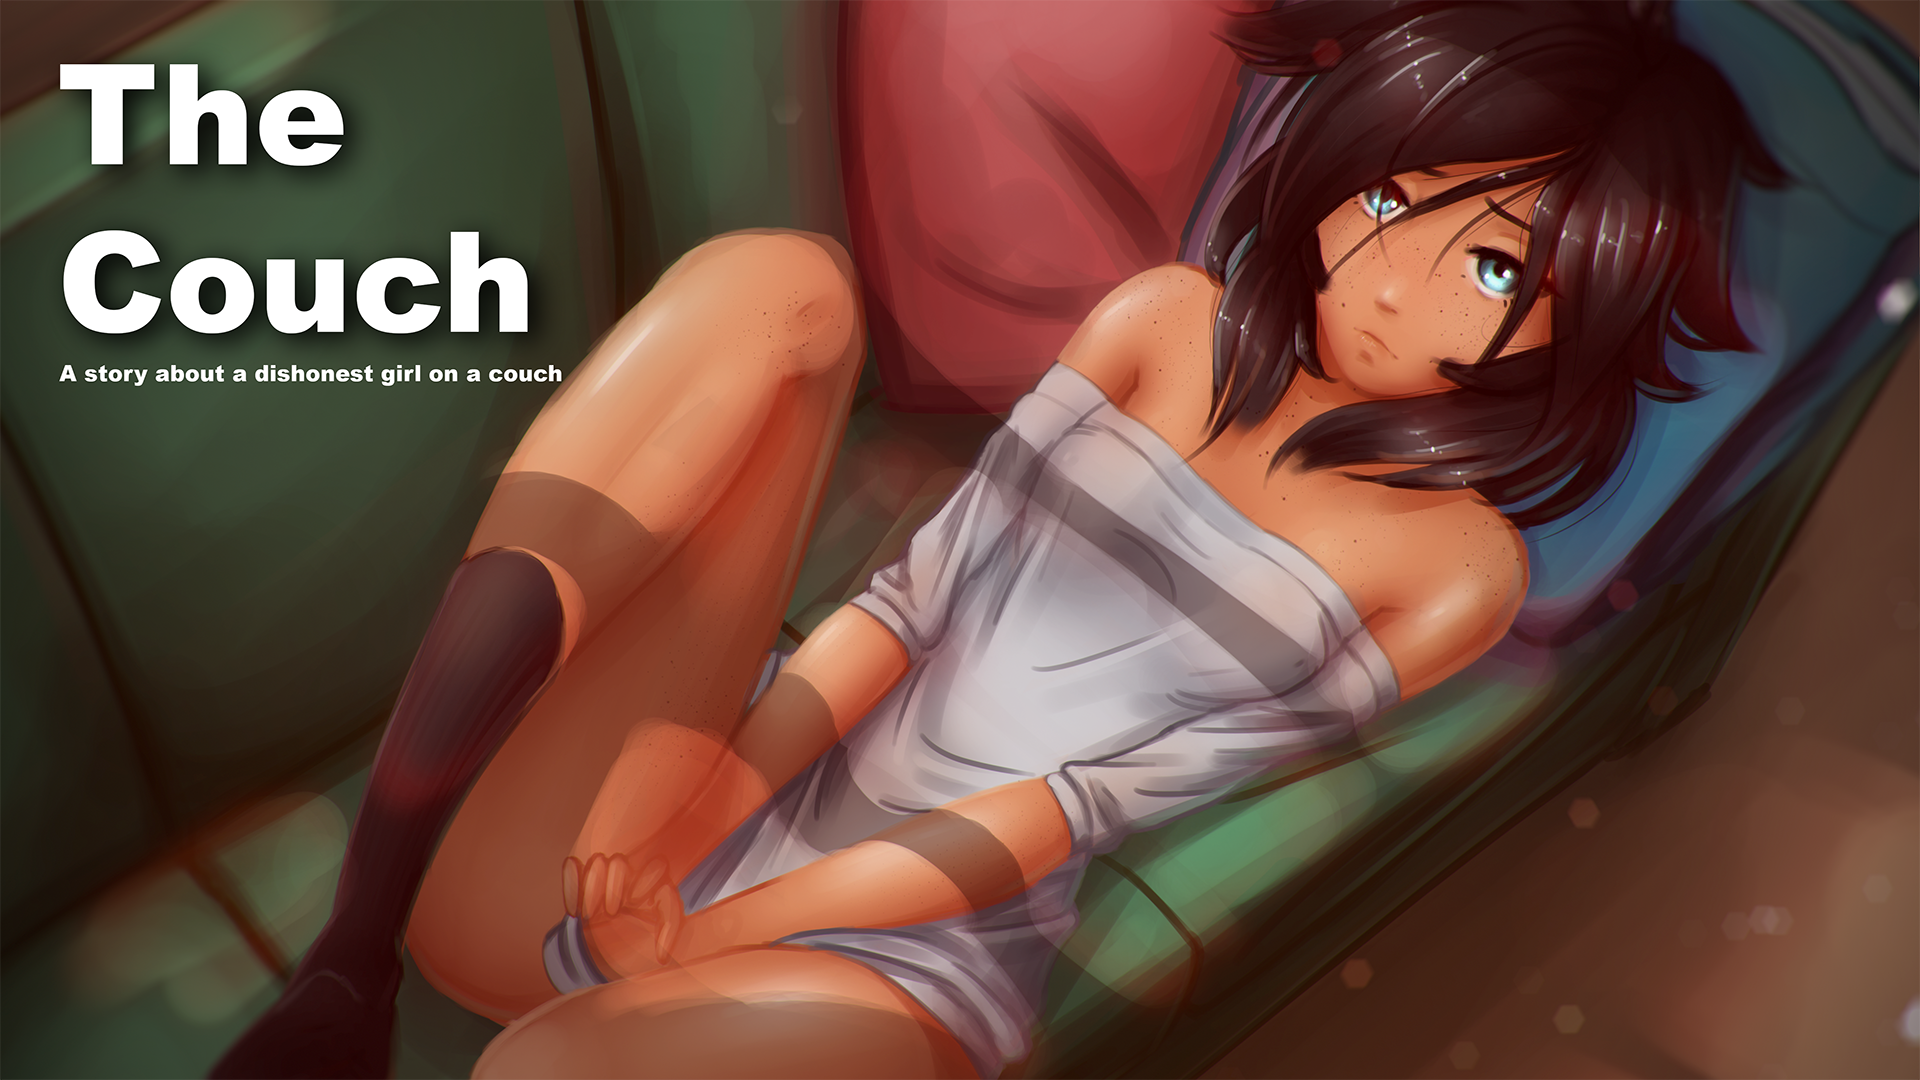 Hentai Porn Software - The Couch by Momoiro Software, Sacb0y, MiNT